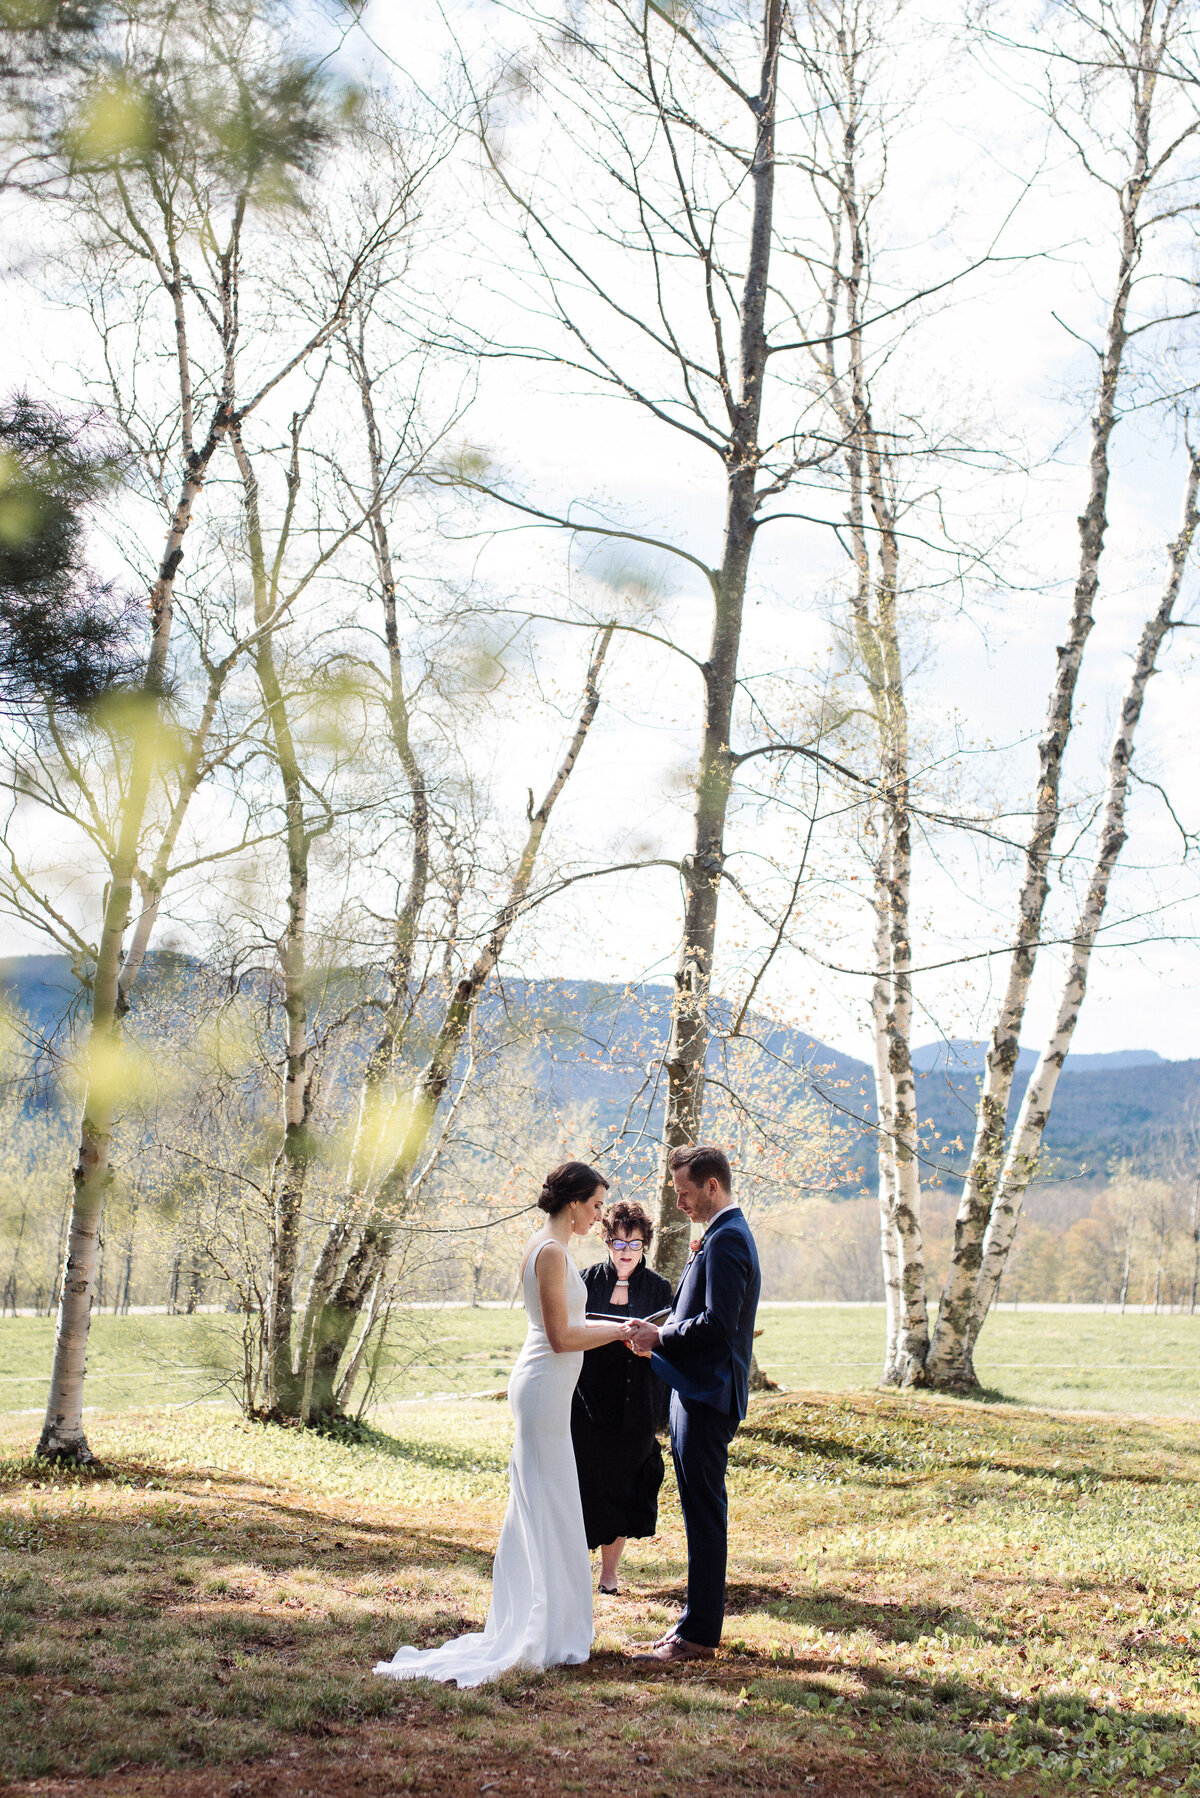 Couples elopes in birch grove in Stowe, VT with green mountains in the background. lindsey leichthammer events.